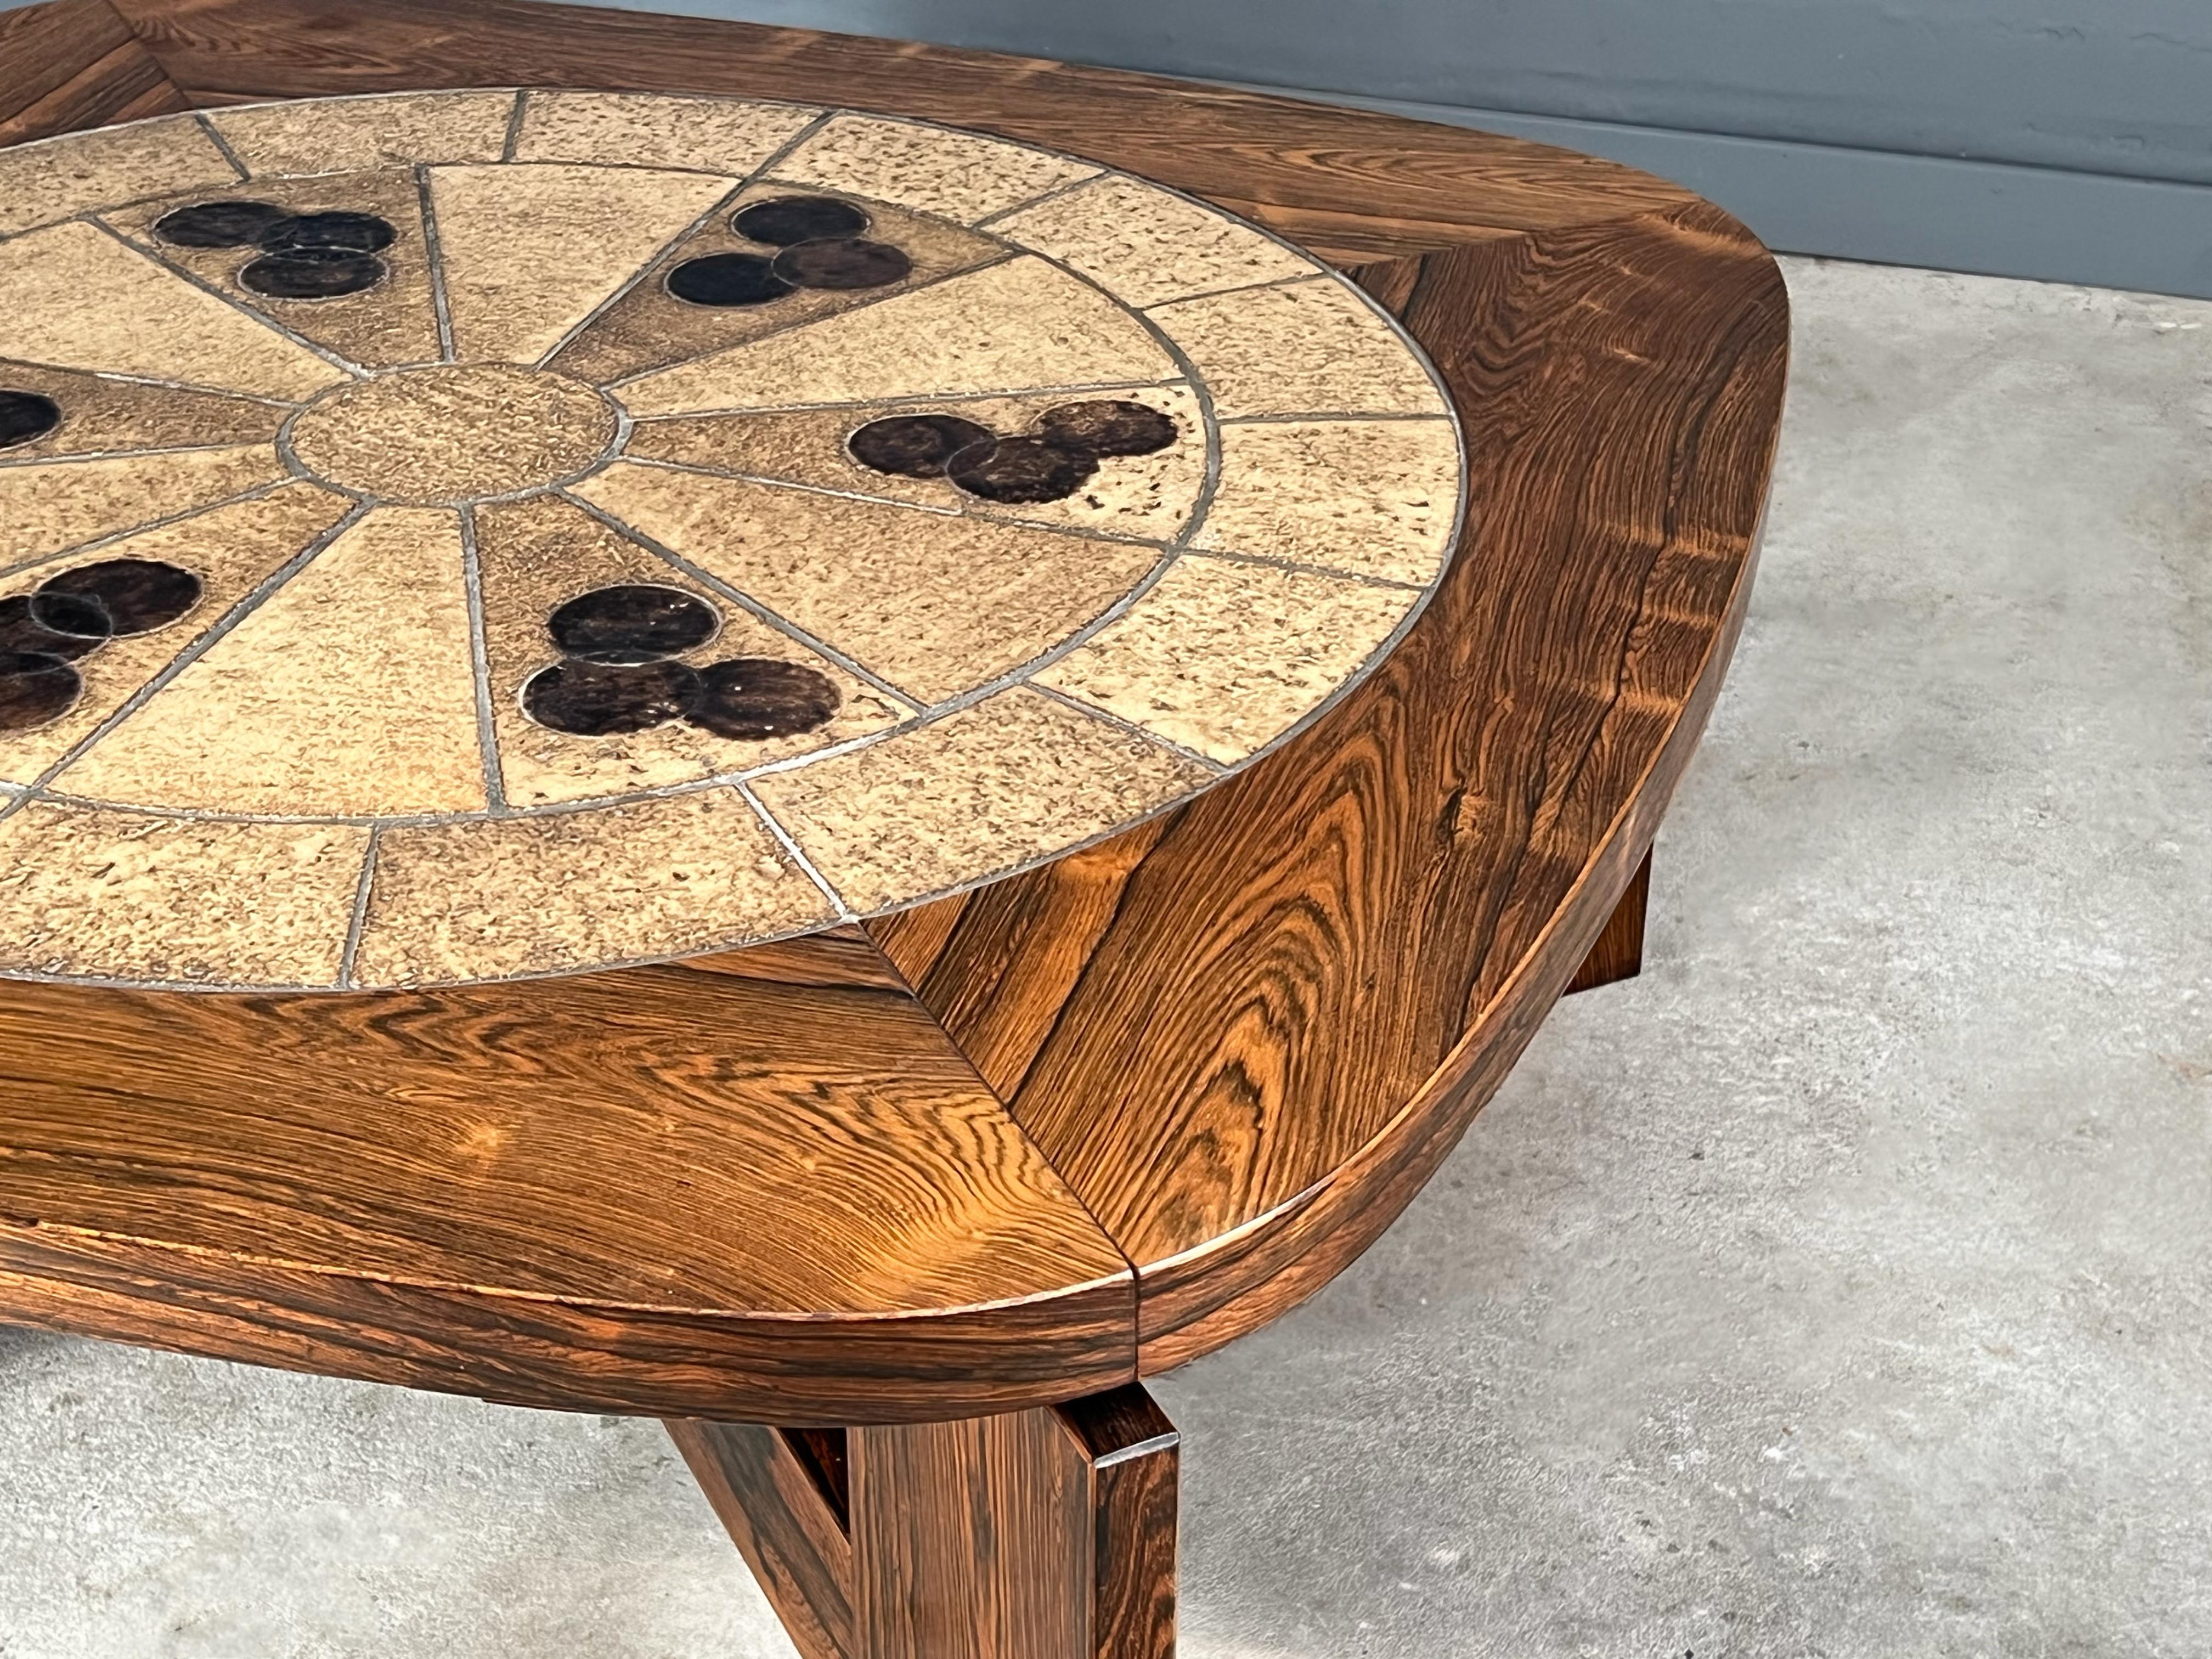 Fired Brazilian Rosewood and Tile Coffee Table Attributed to Tue Poulsen